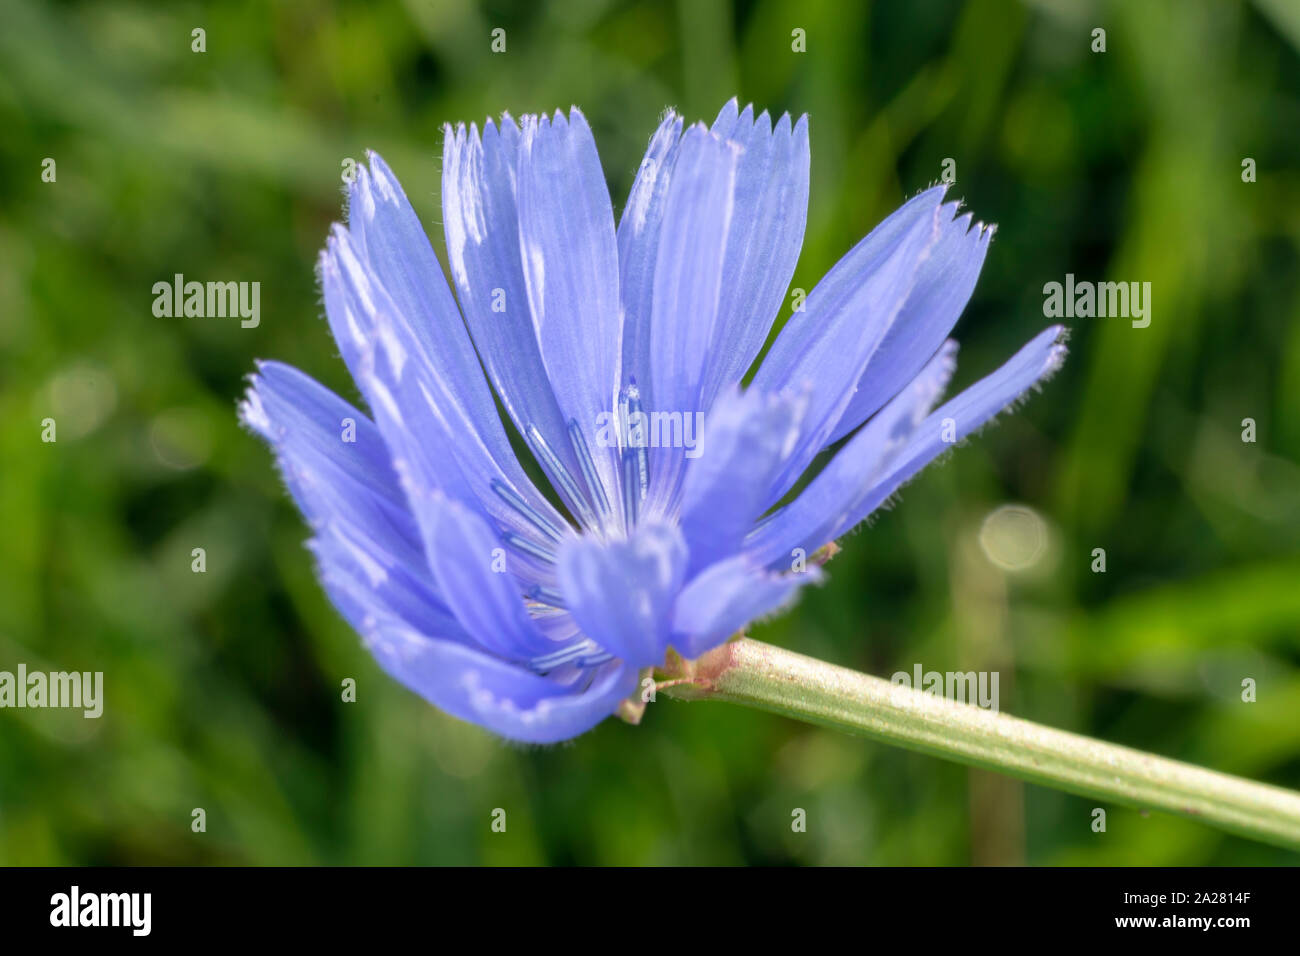 Common chicory (lat. Cichorium intybus) flowers blossoms commonly called blue sailors, chicory, coffee weed, or succory is a herbaceous perennial plan Stock Photo